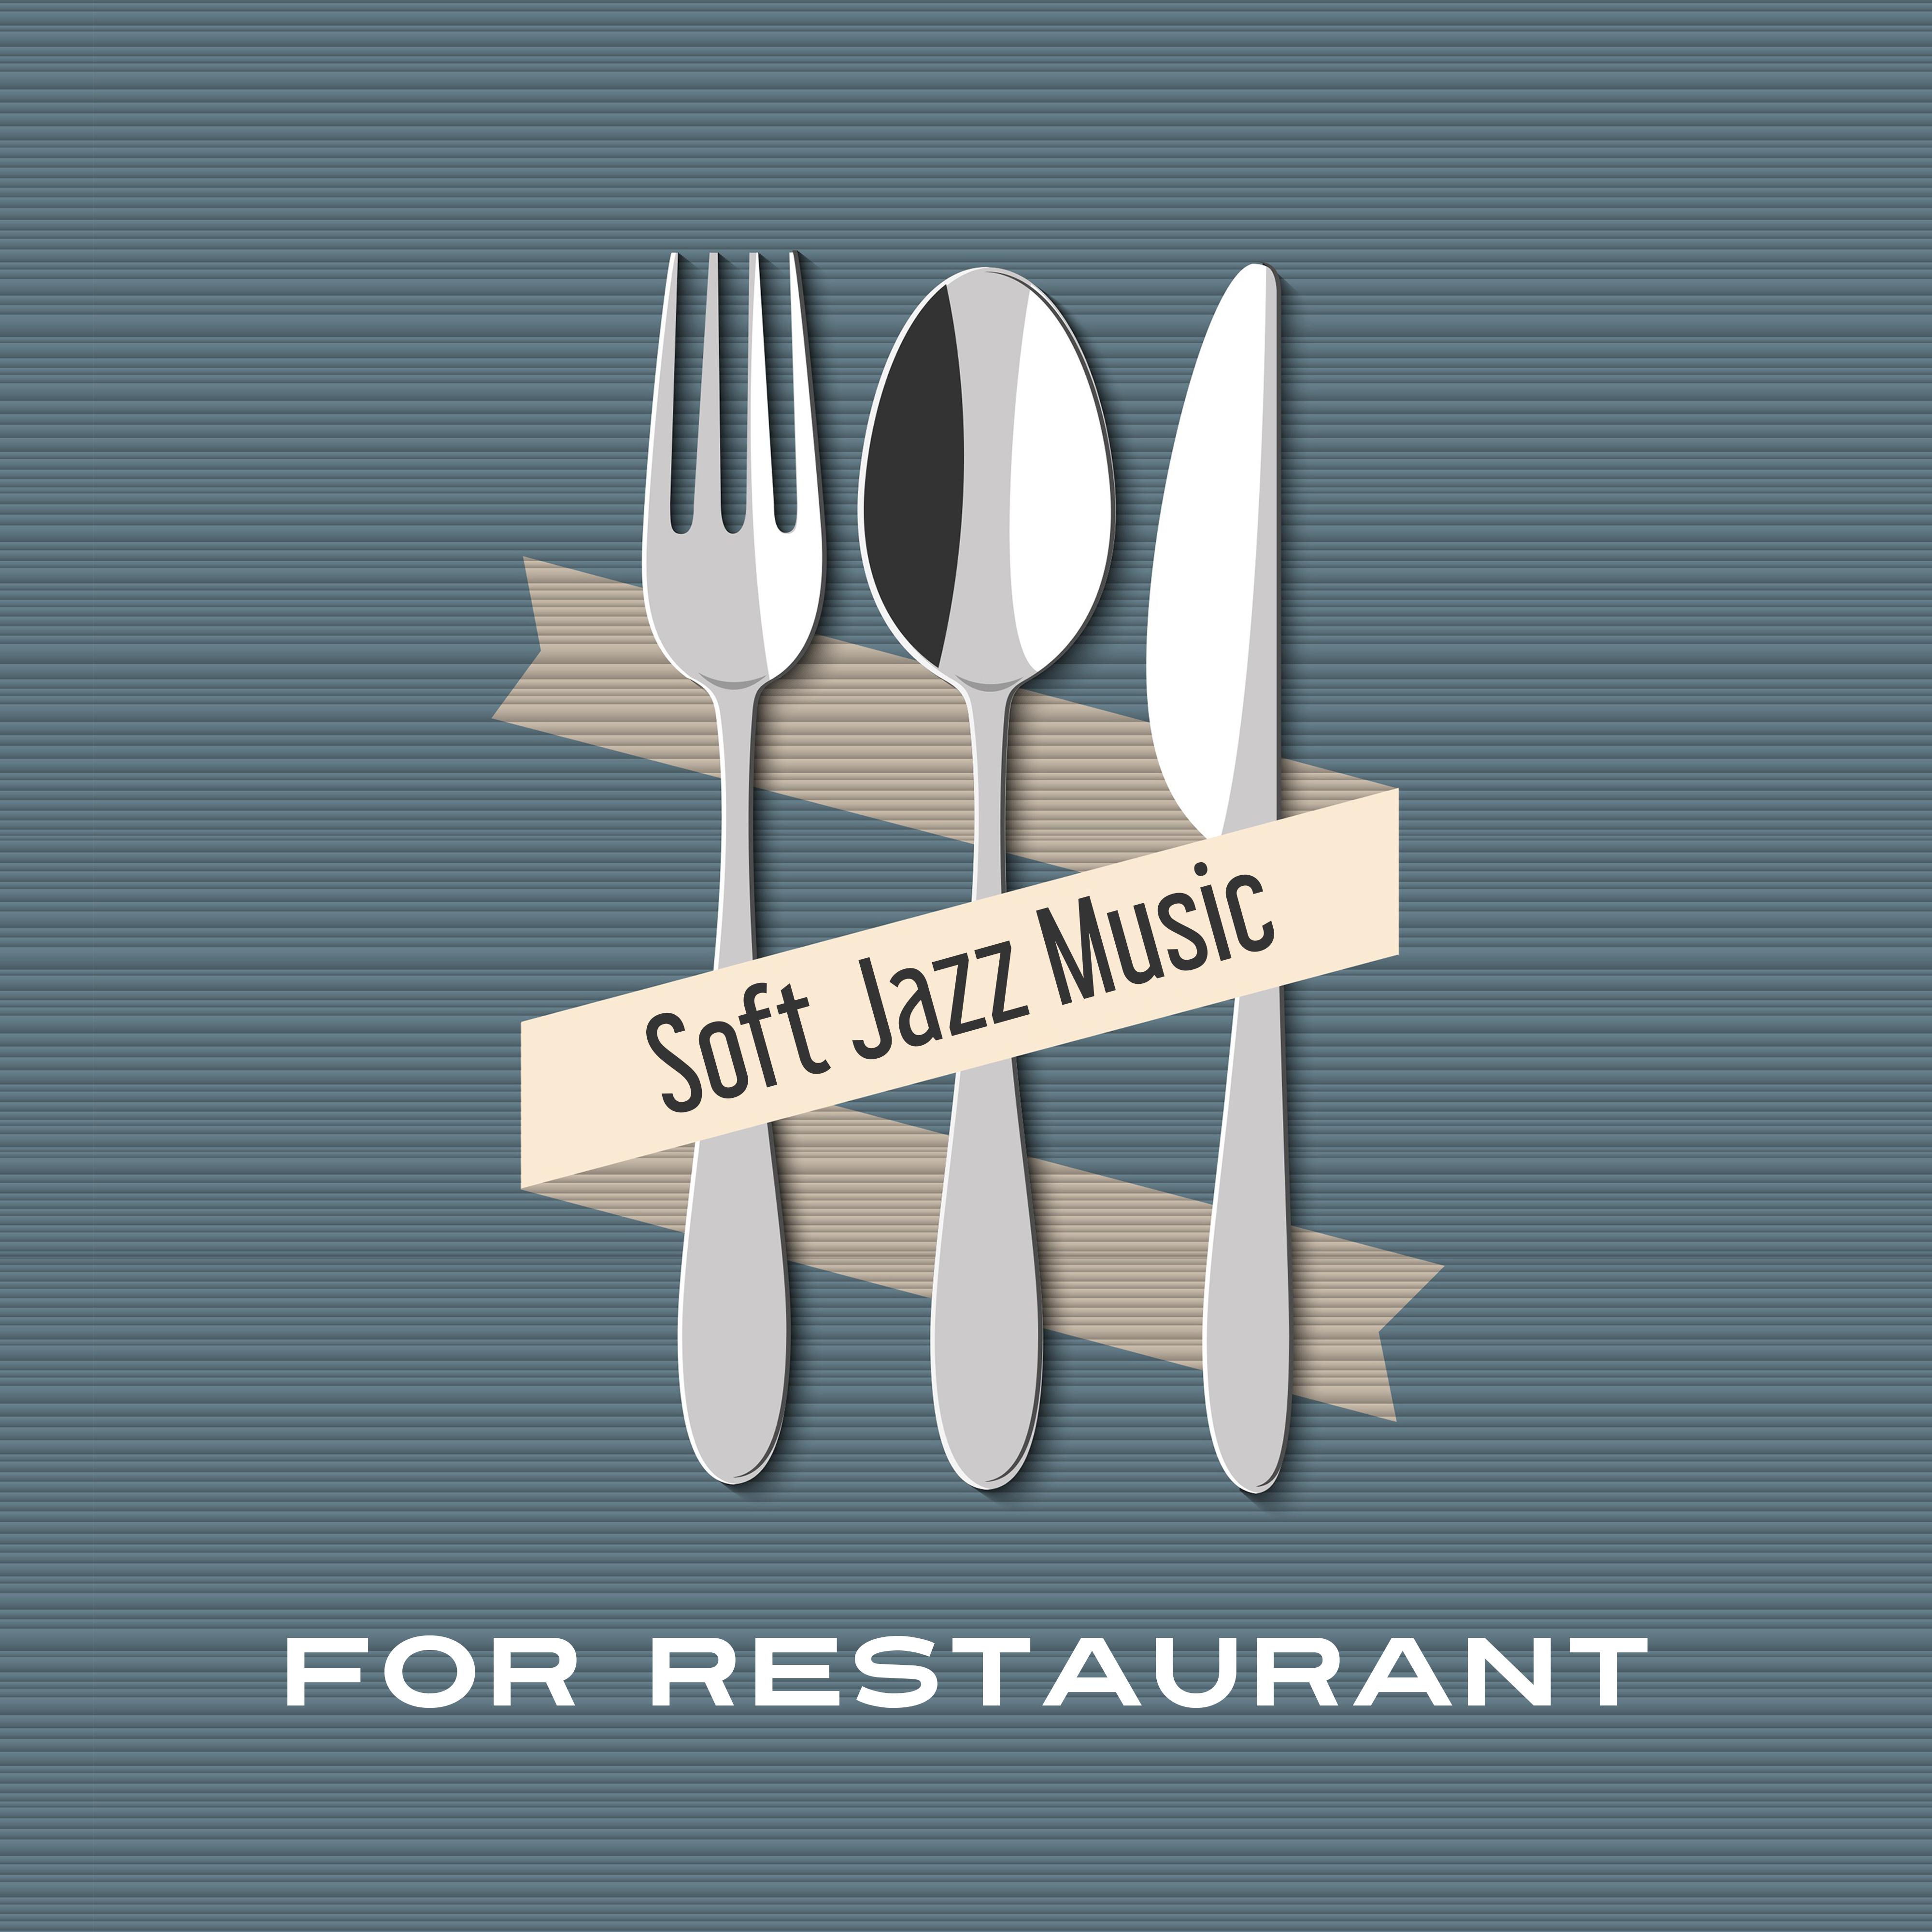 Soft Jazz Music for Restaurant – Calm Down with Jazz Music, Easy Listening, Piano Sounds, Coffee Time